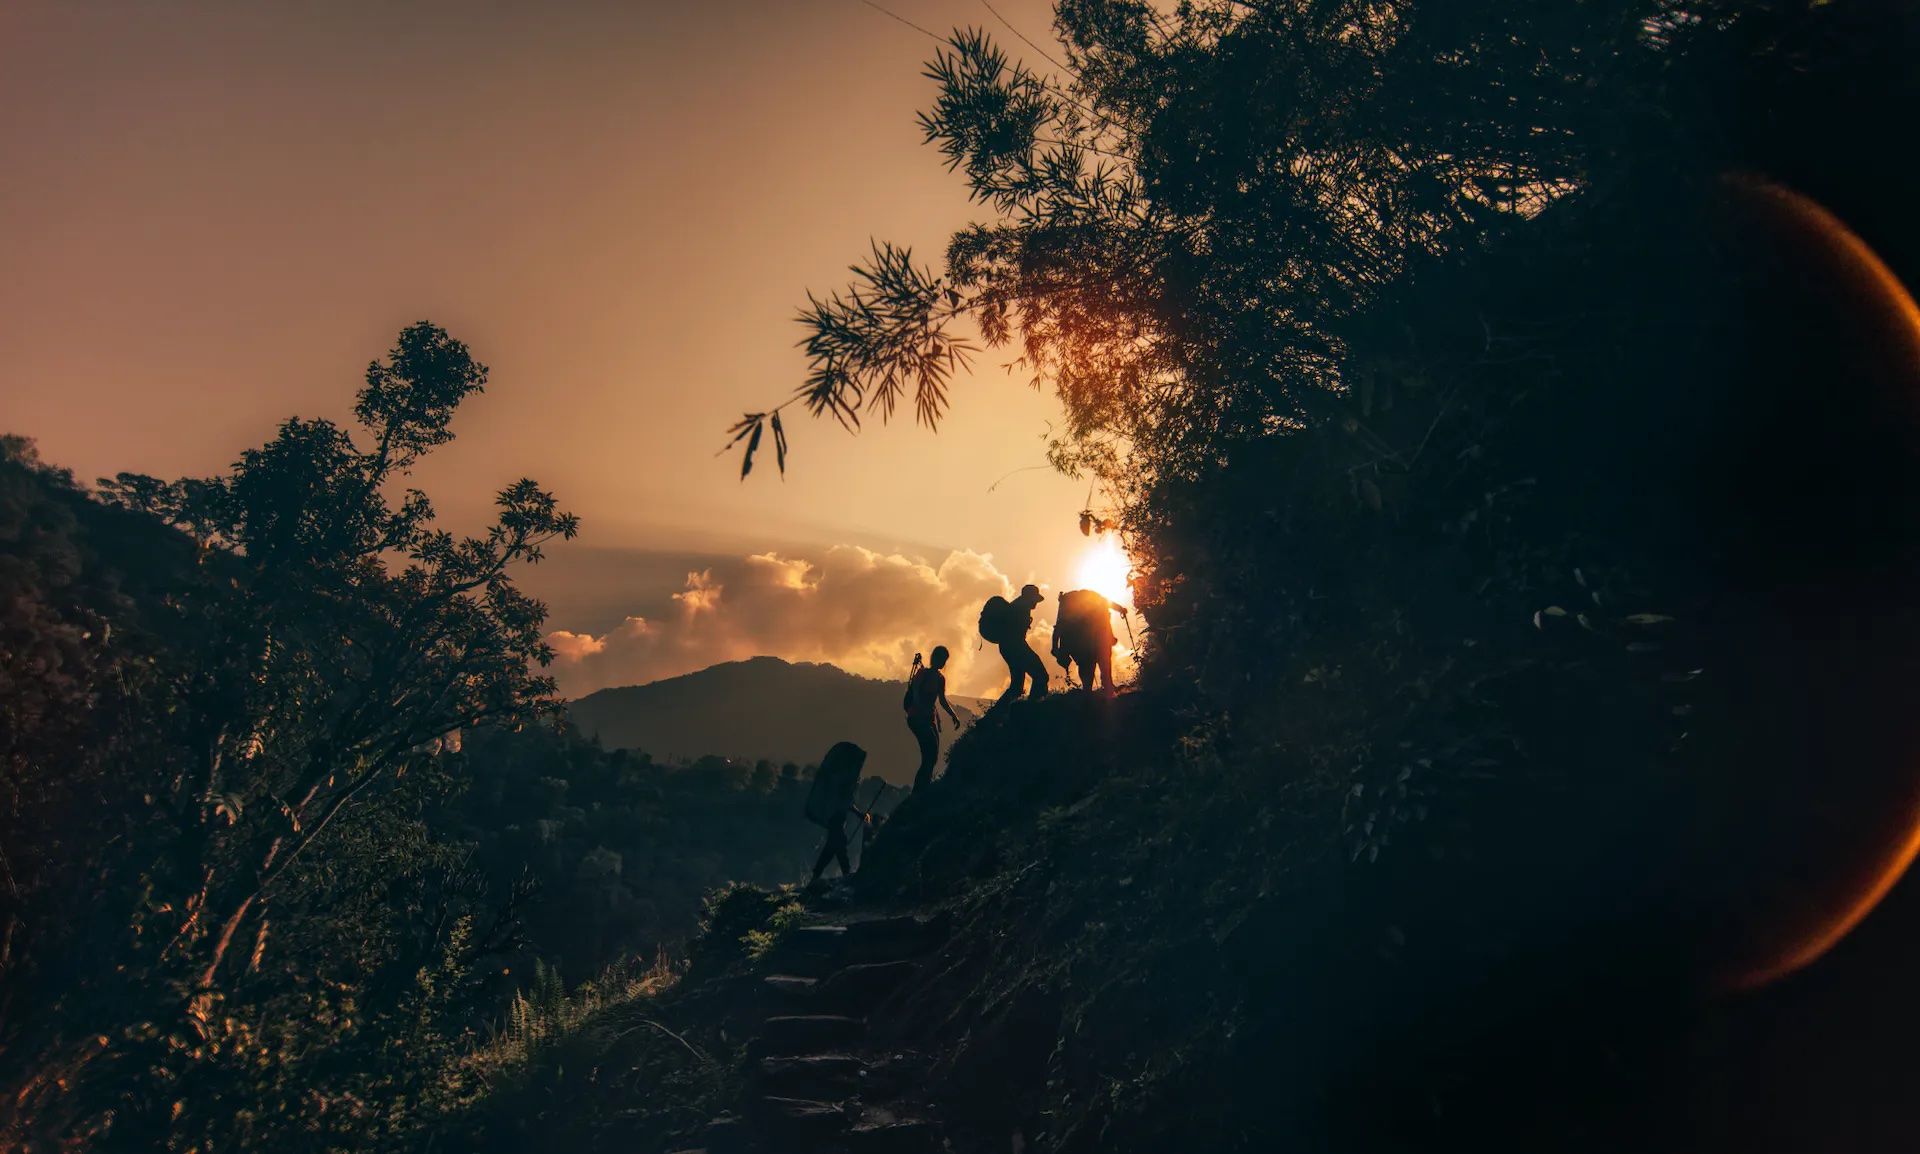 Four travellers on a hiking trail at sunset in Nepal.